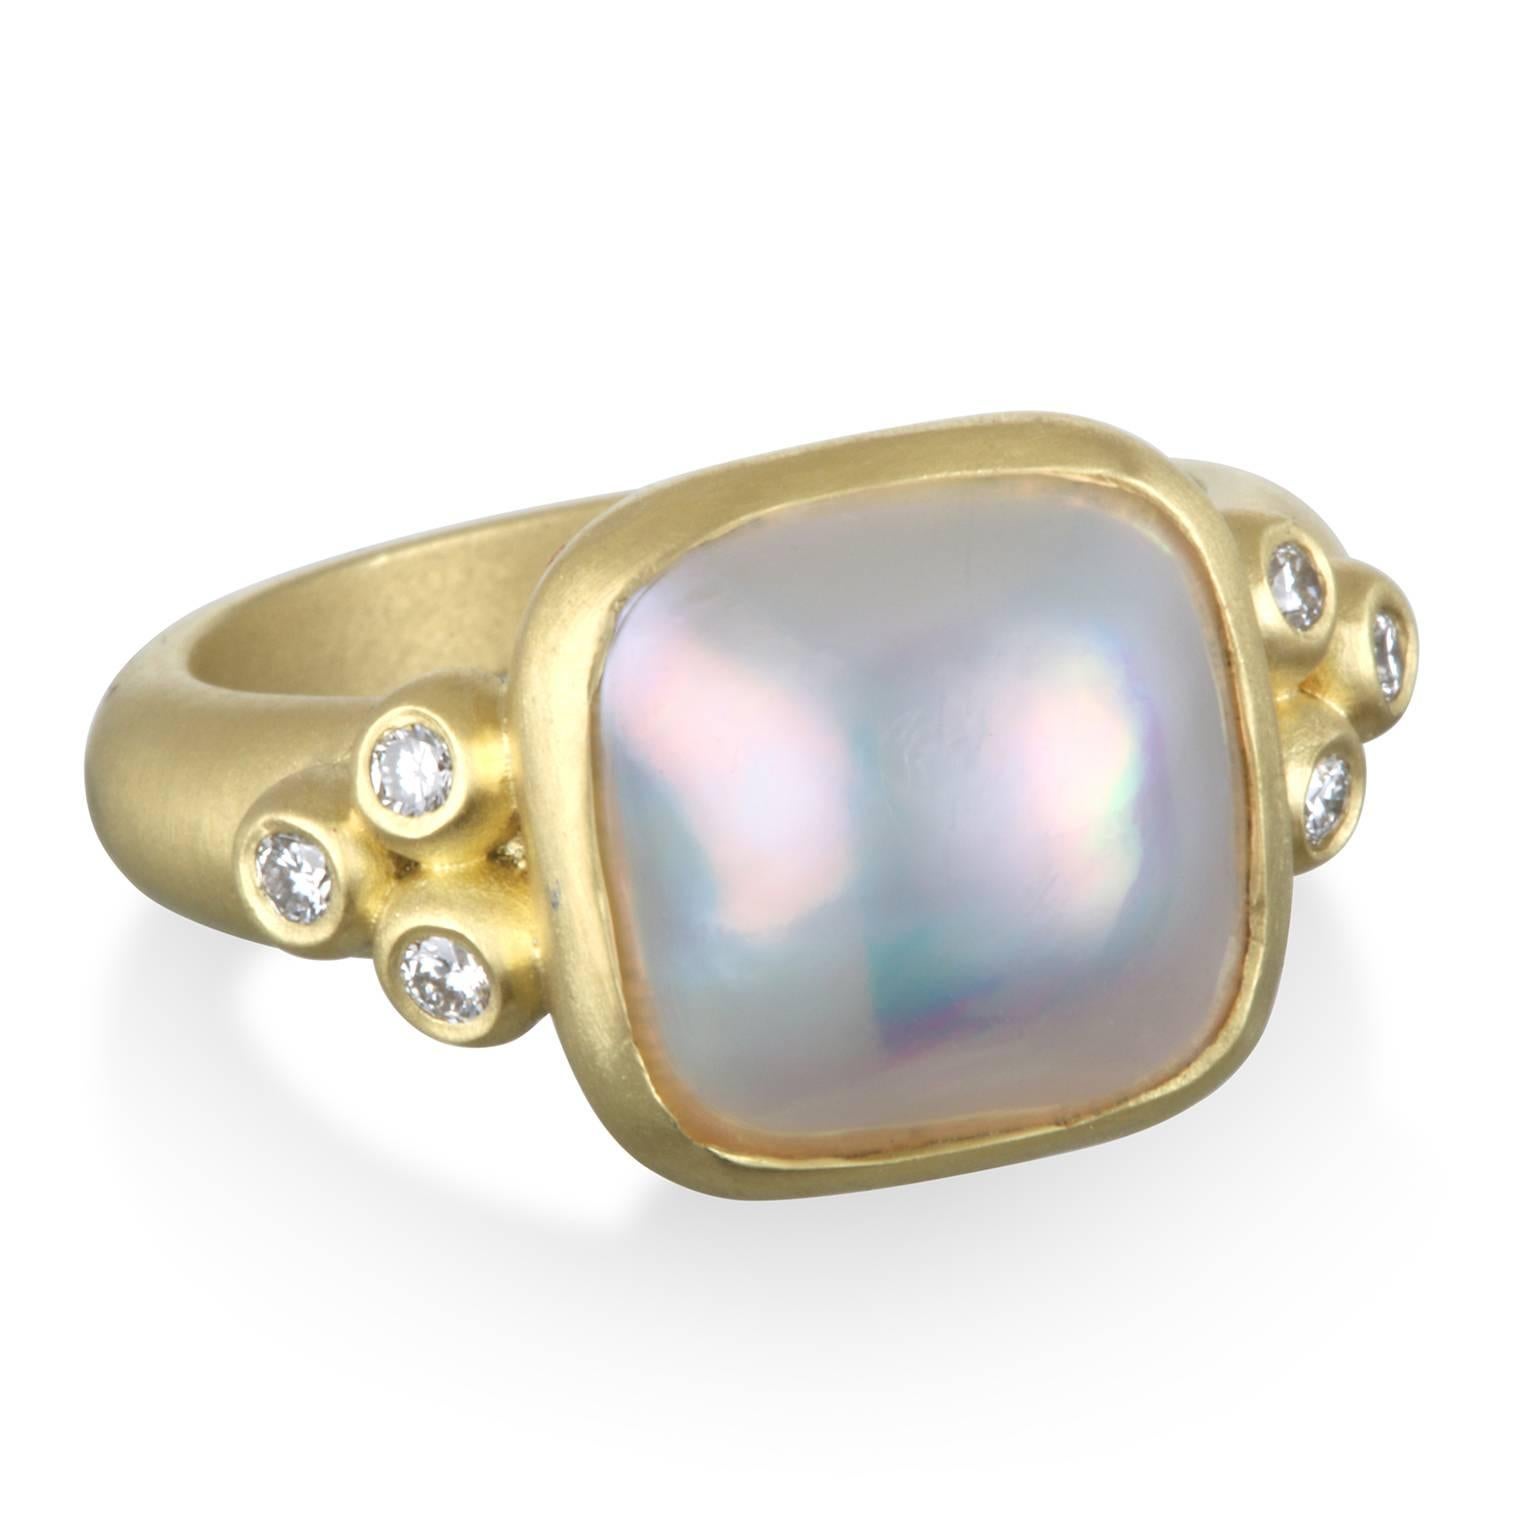 Handcrafted in 18k gold, this cushion shaped mabe pearl and diamond ring is the perfect blend of classic and contemporary design. The matte green gold bezel highlights the Mabe pearl's gem qualities of exceptional color and luster. 
This fashionable